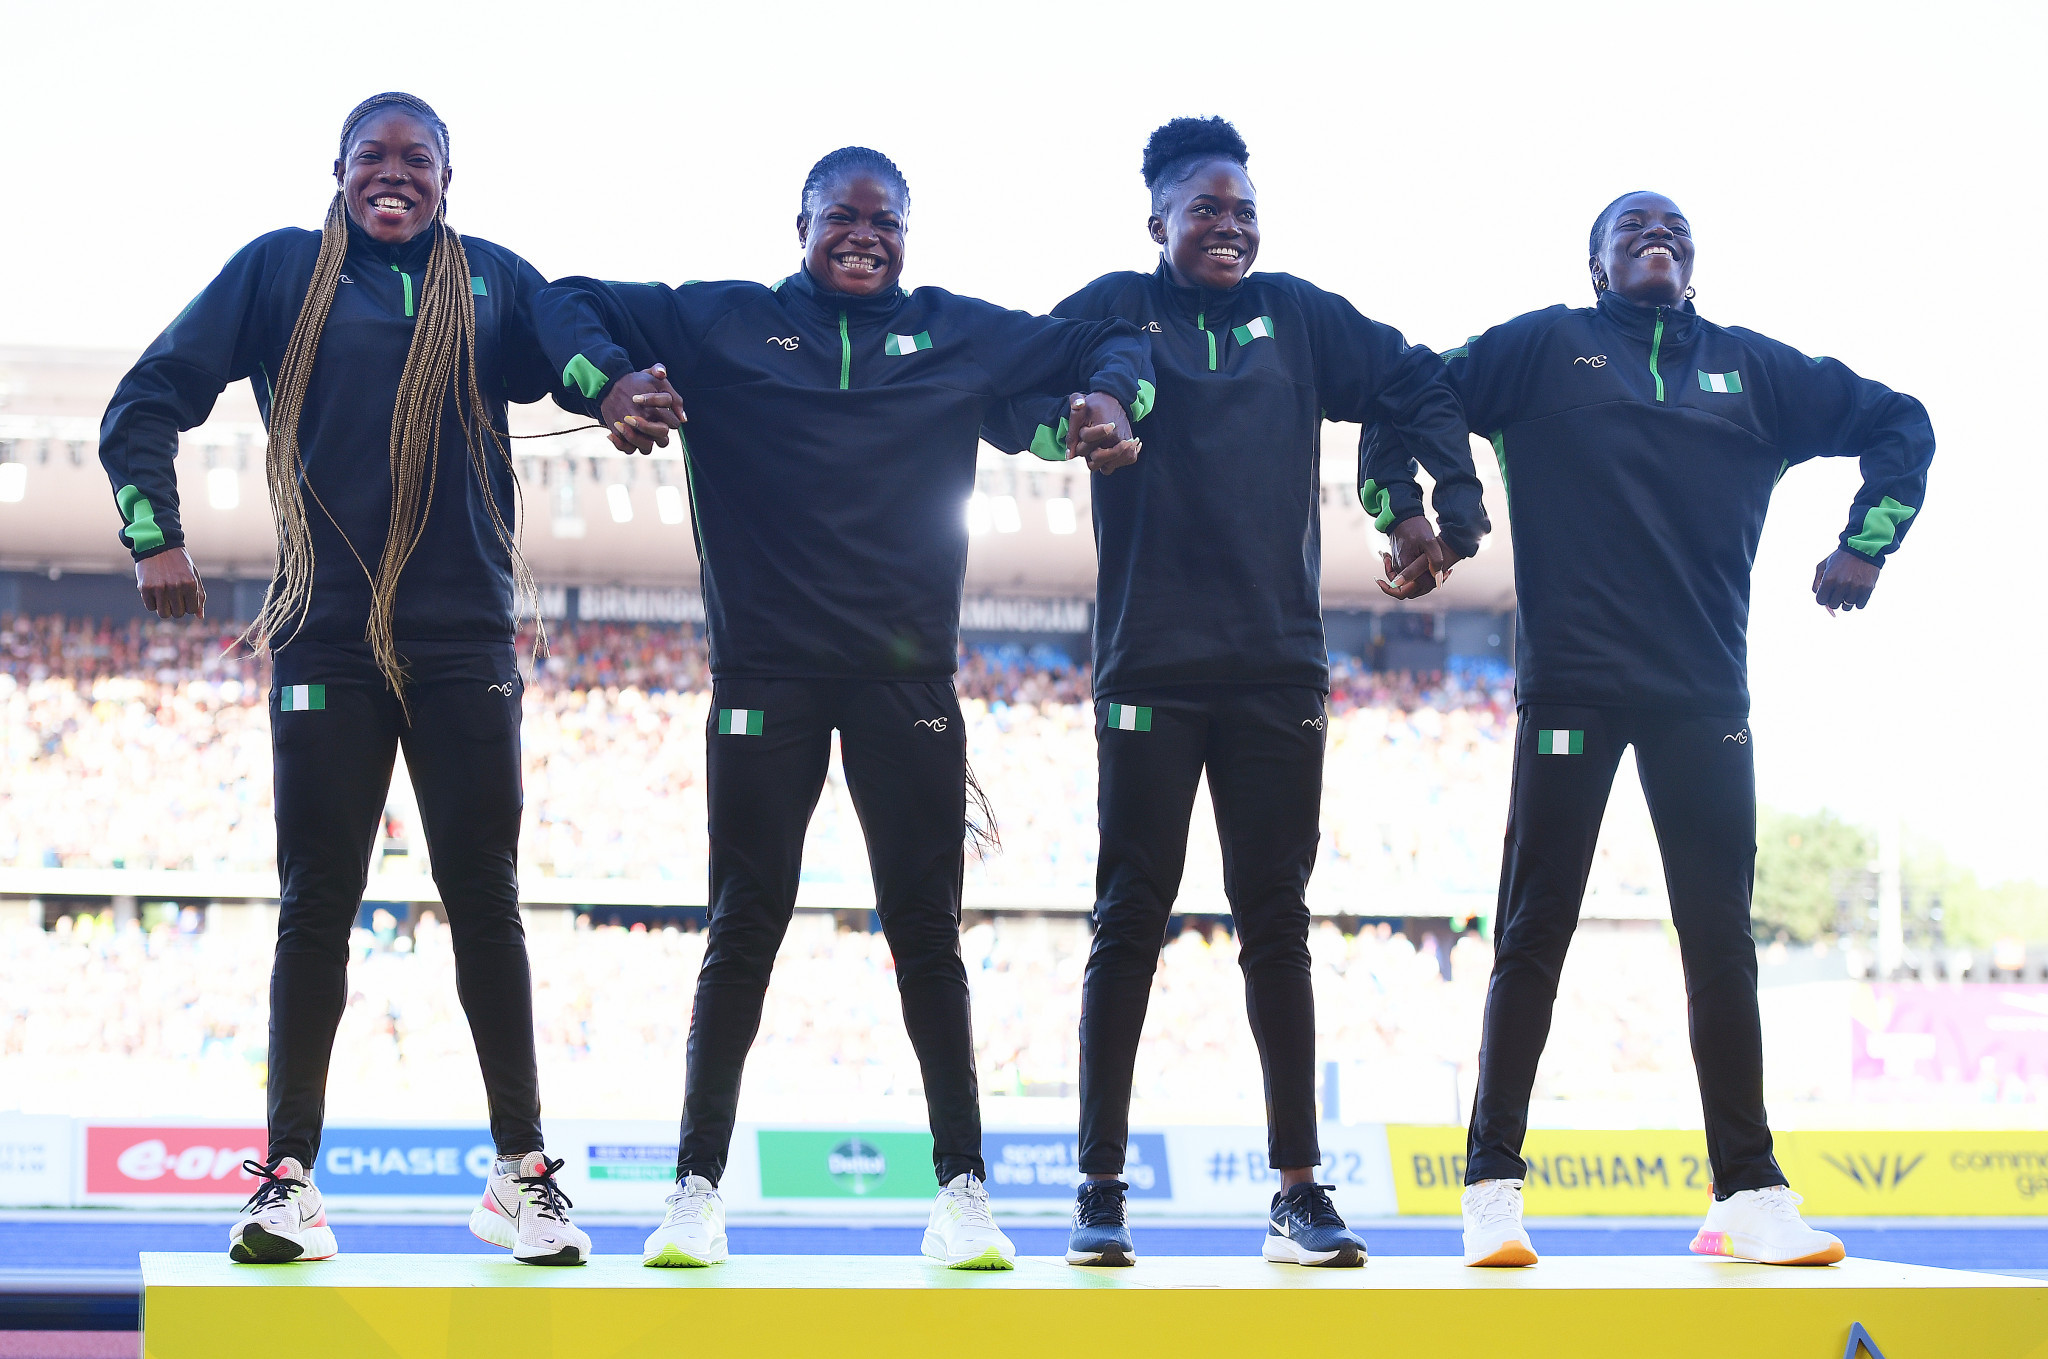 Nigeria have been stripped of their women's 4x100 metres relay golds won at Birmingham 2022 following Nwokocha's positive drugs test ©Getty Images